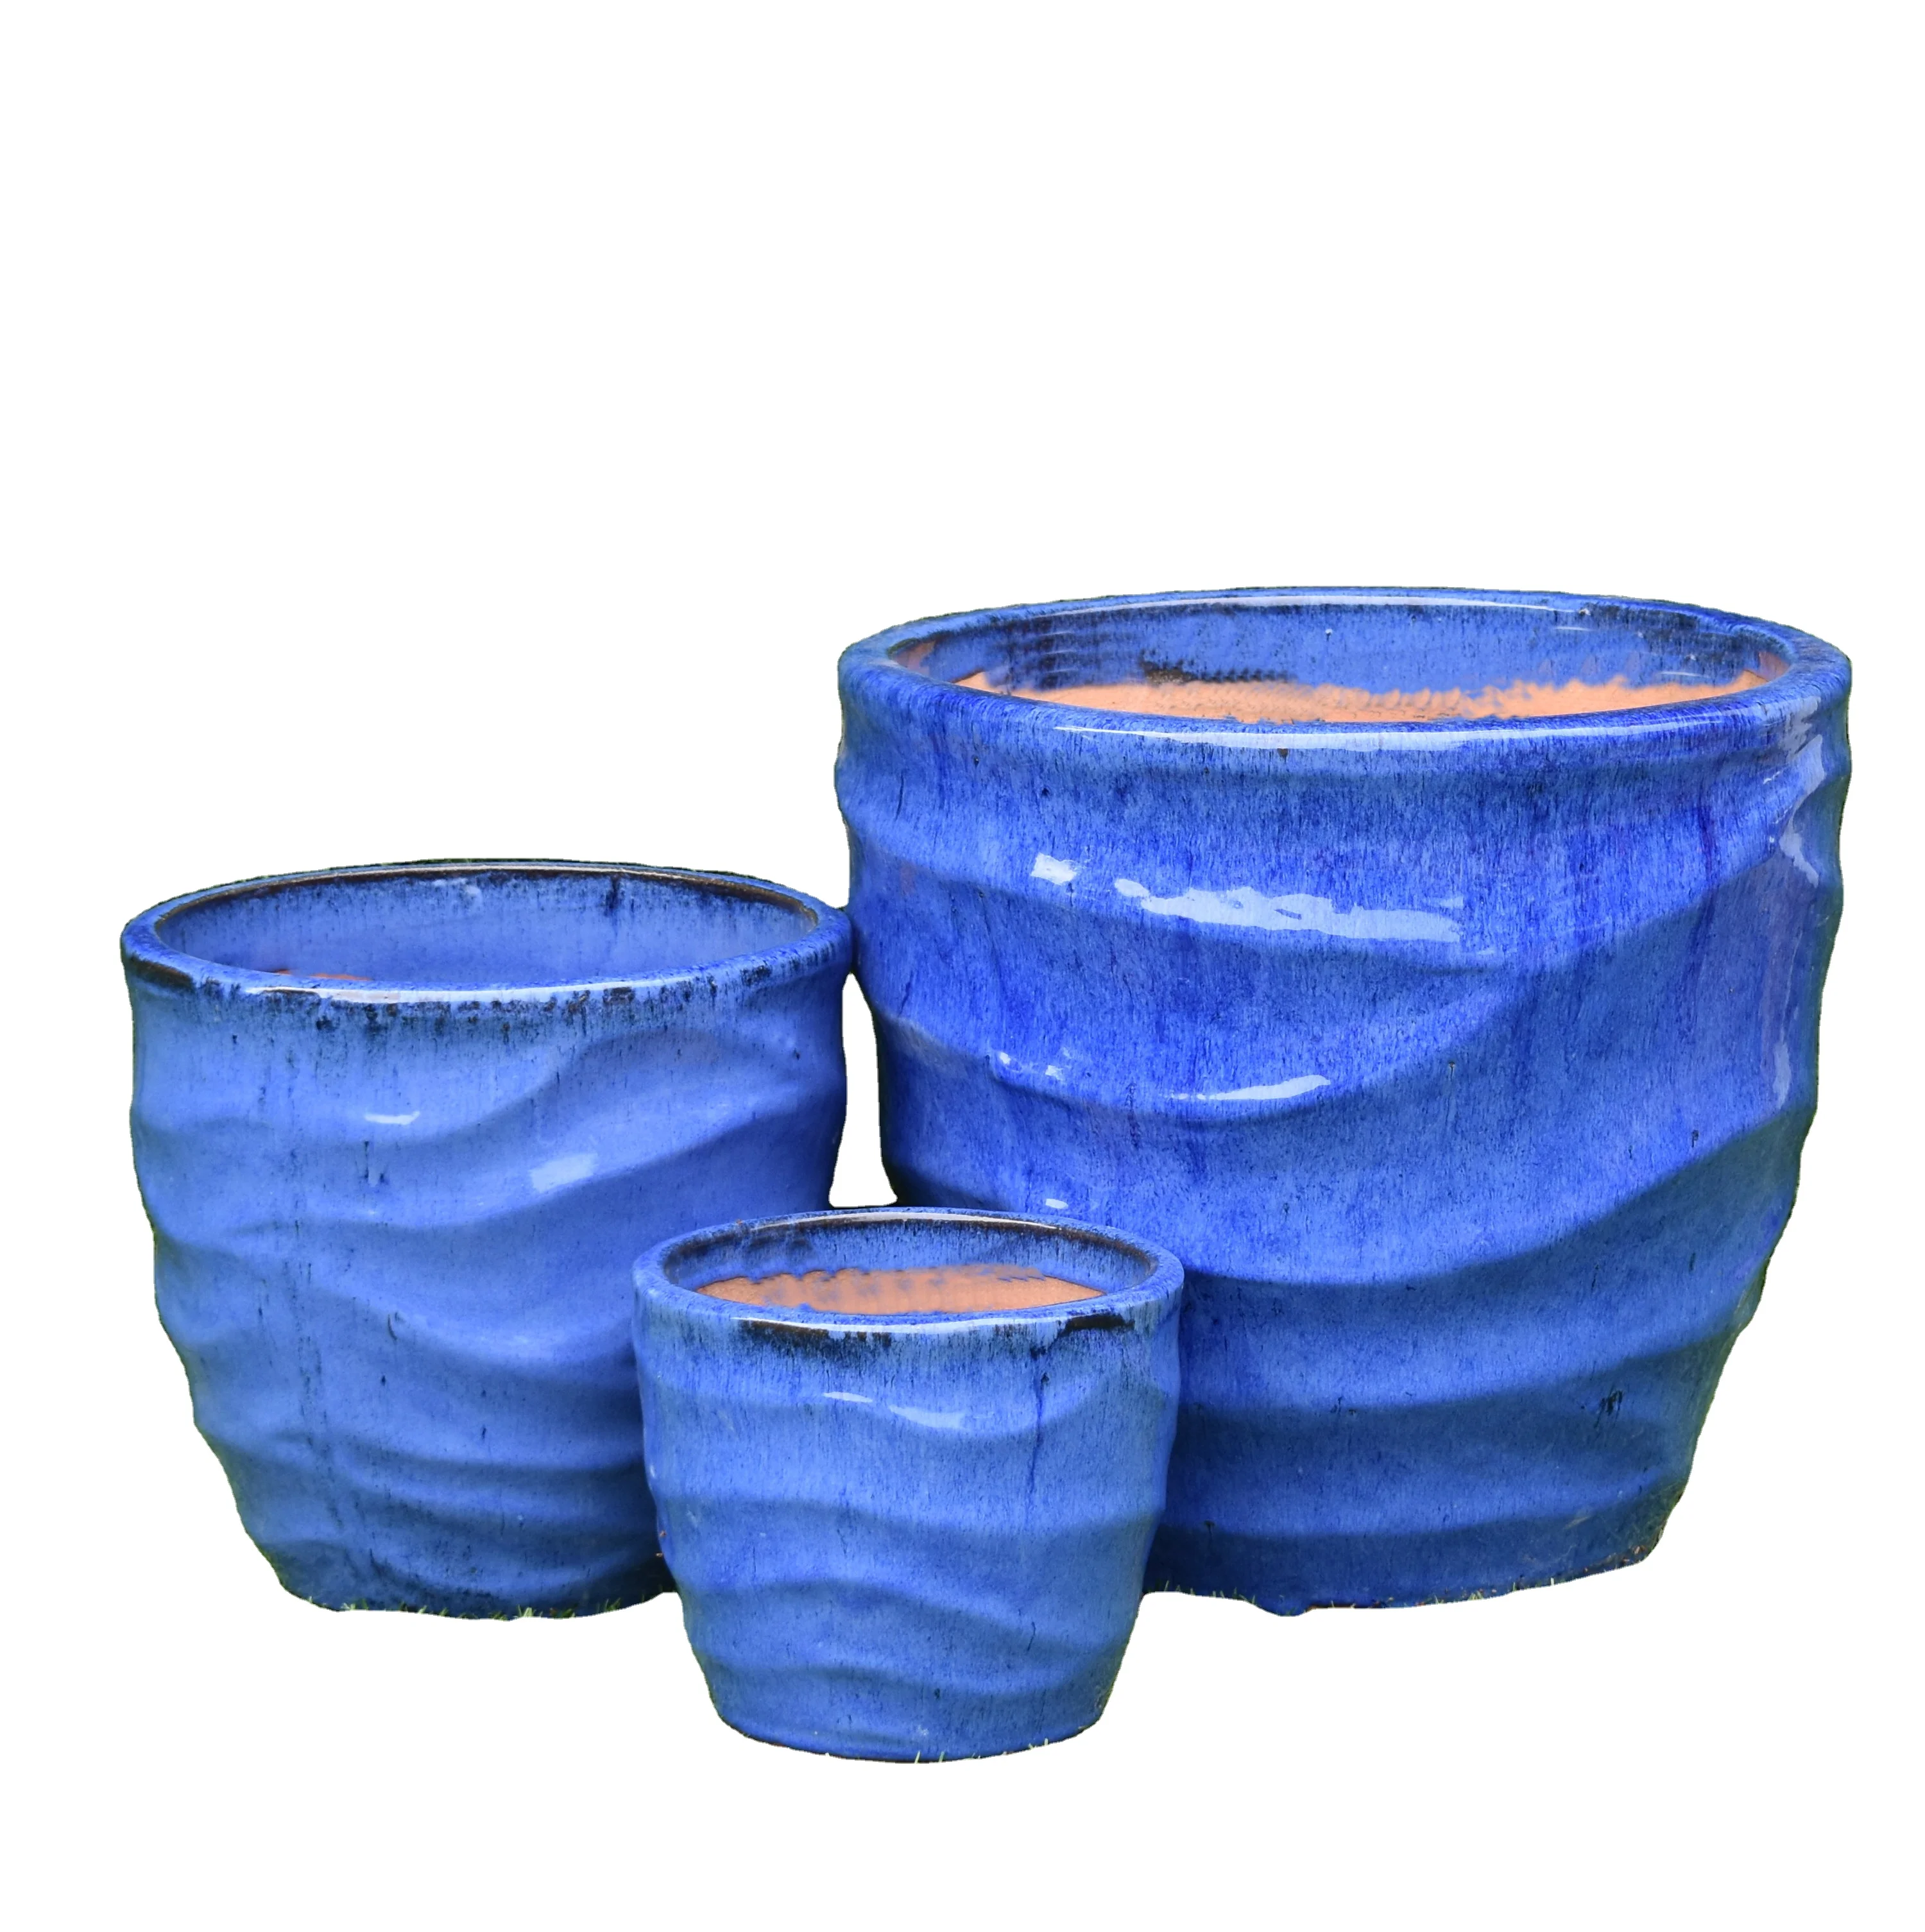 Wholesale Hot Sale round Glazed Ceramic Planters Indoor and Outdoor Home and Garden Flower Pot Clay Glaze Pot